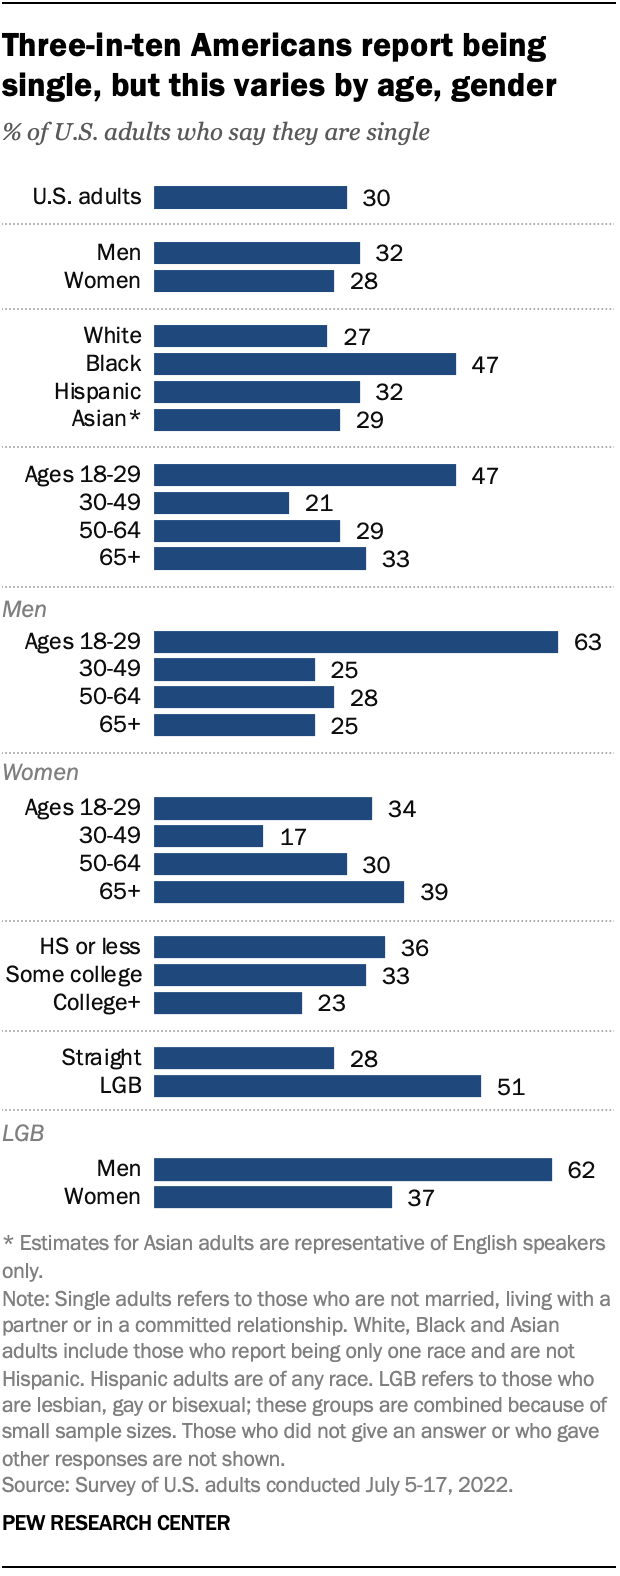 A bar chart showing that three-in-ten Americans report being single, but this varies by age and gender